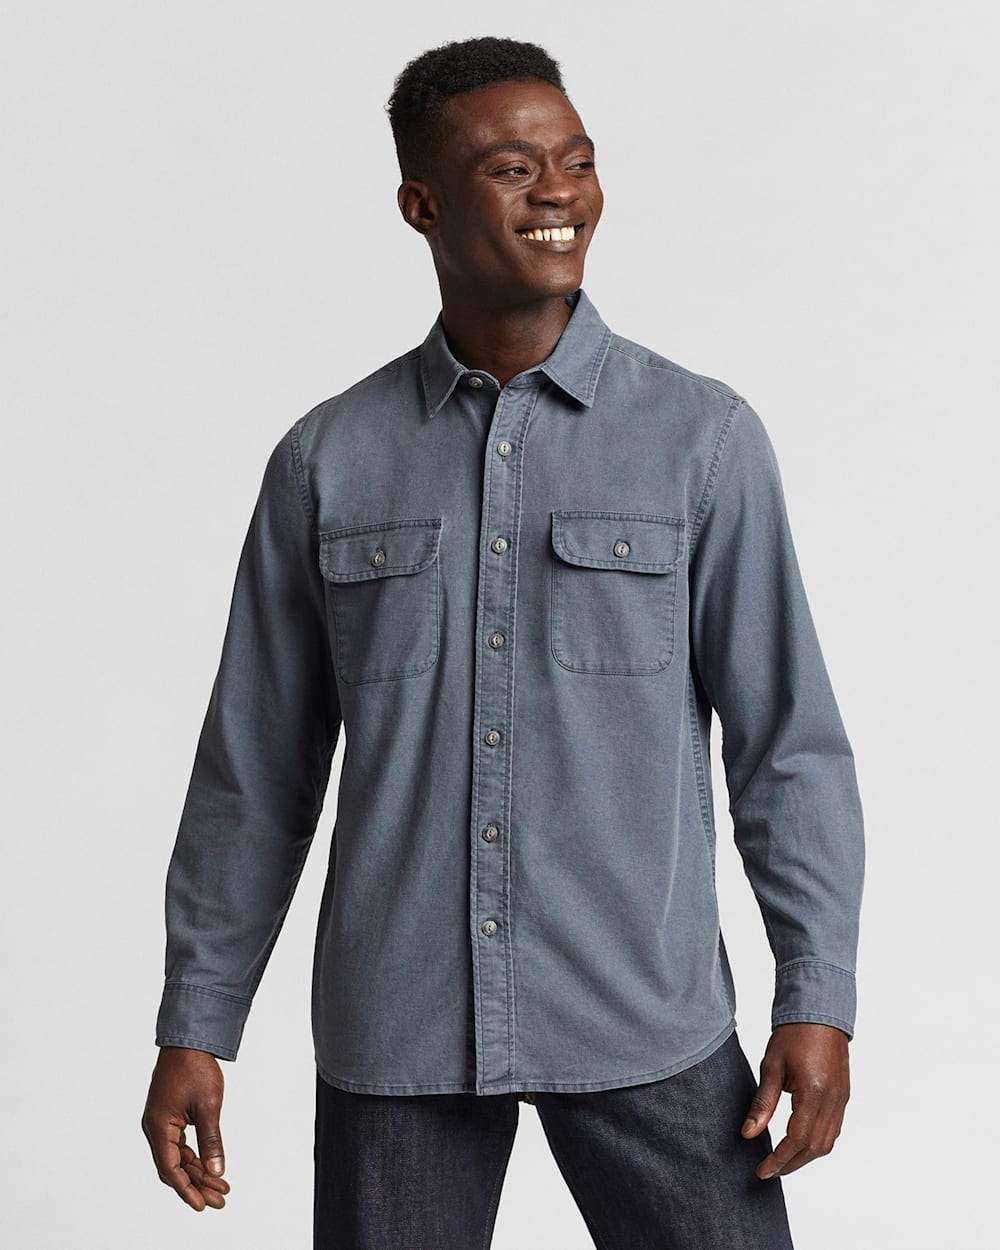 ALTERNATE VIEW OF MEN'S BEACH SHACK COTTON TWILL SHIRT IN FADED BLUE image number 5